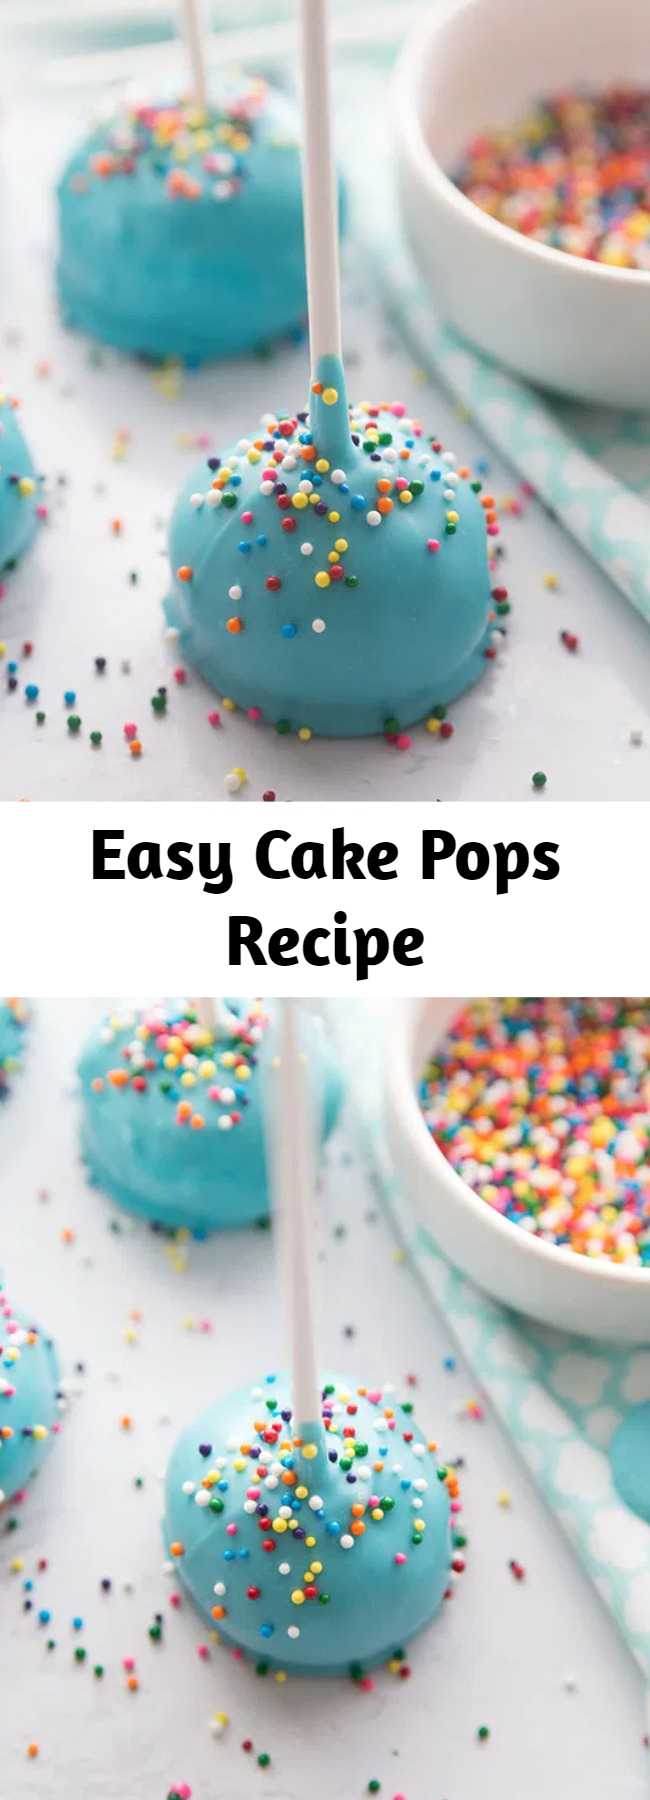 Easy Cake Pops Recipe - Such a fun and easy treat to make with kids! Perfect to make for birthday parties too! #recipes #kidsrecipes #snacks #treats #bestideasforkids